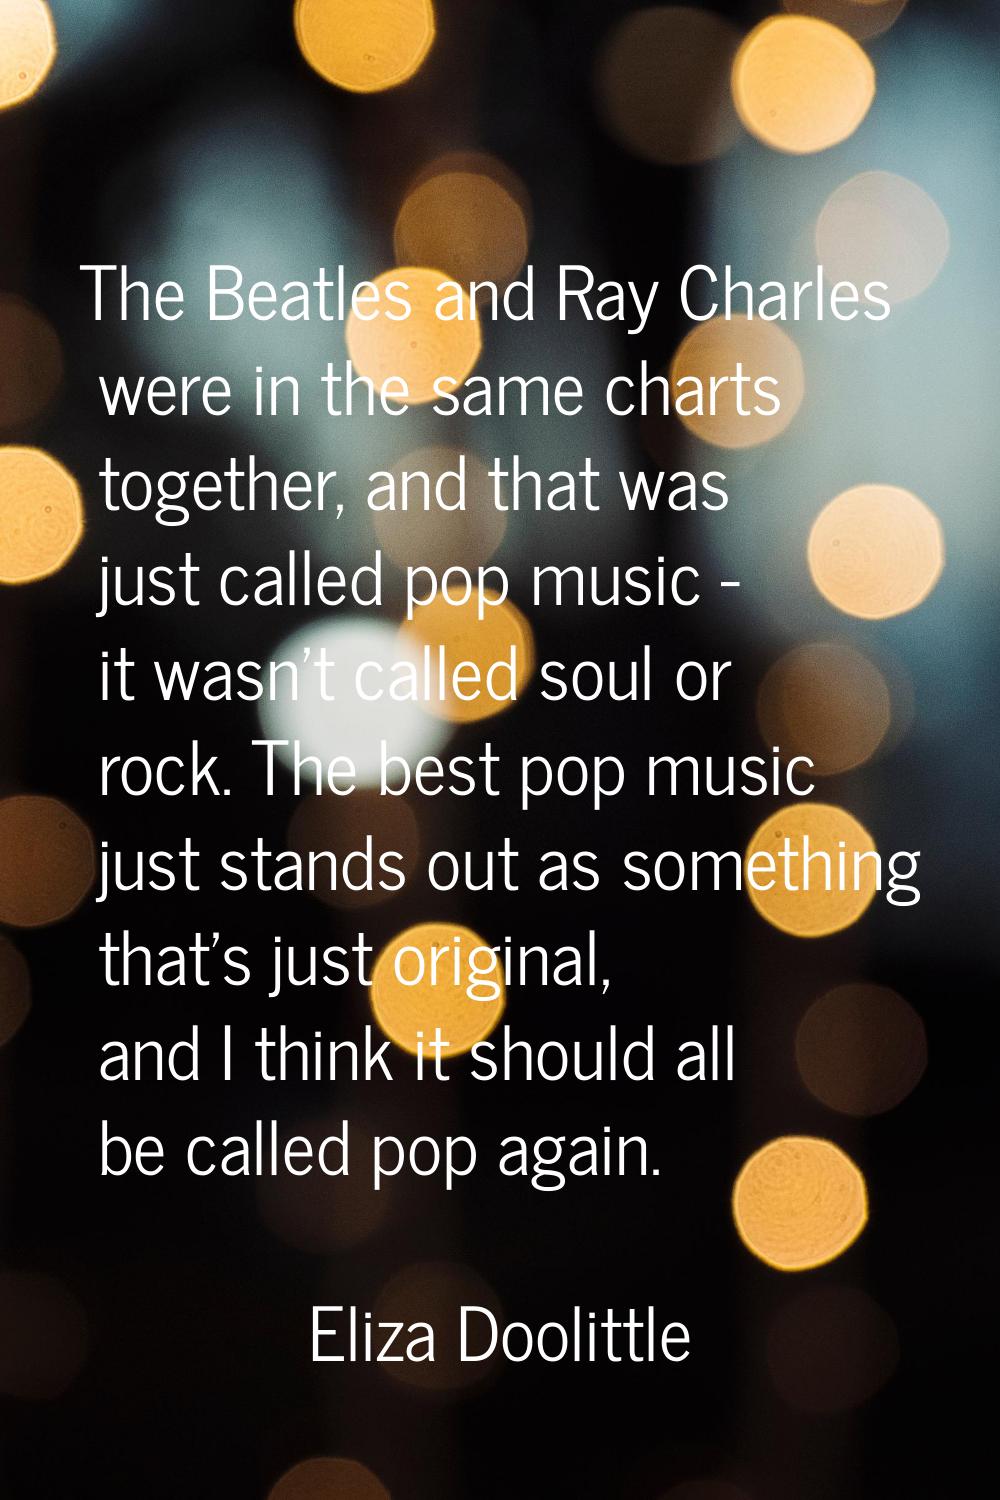 The Beatles and Ray Charles were in the same charts together, and that was just called pop music - 